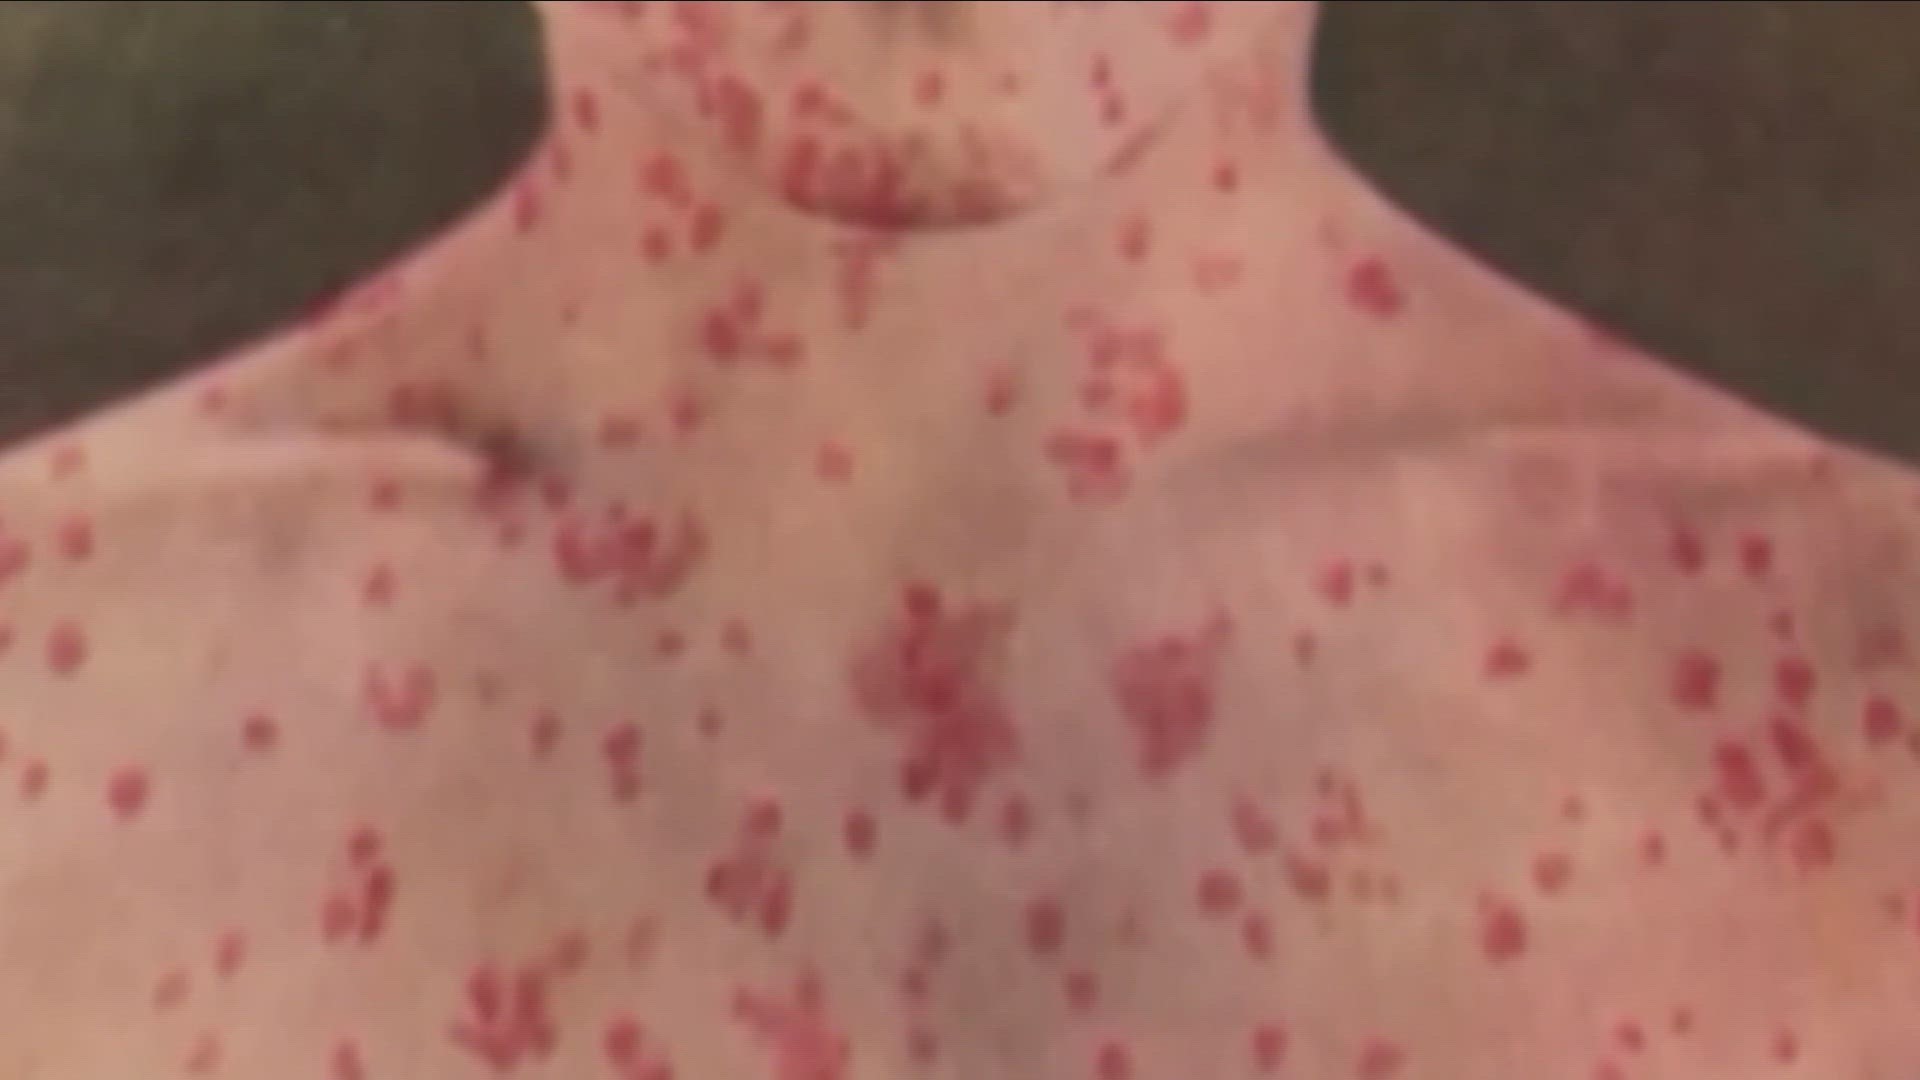 MEASLES OUTBREAK IN THE U-S IS CONCERNING HEALTH EXPERTS.
THE C-D-C REPORTS MORE THAN 100 CASES HAVE BEEN RECORDED SO FAR THIS YEAR.